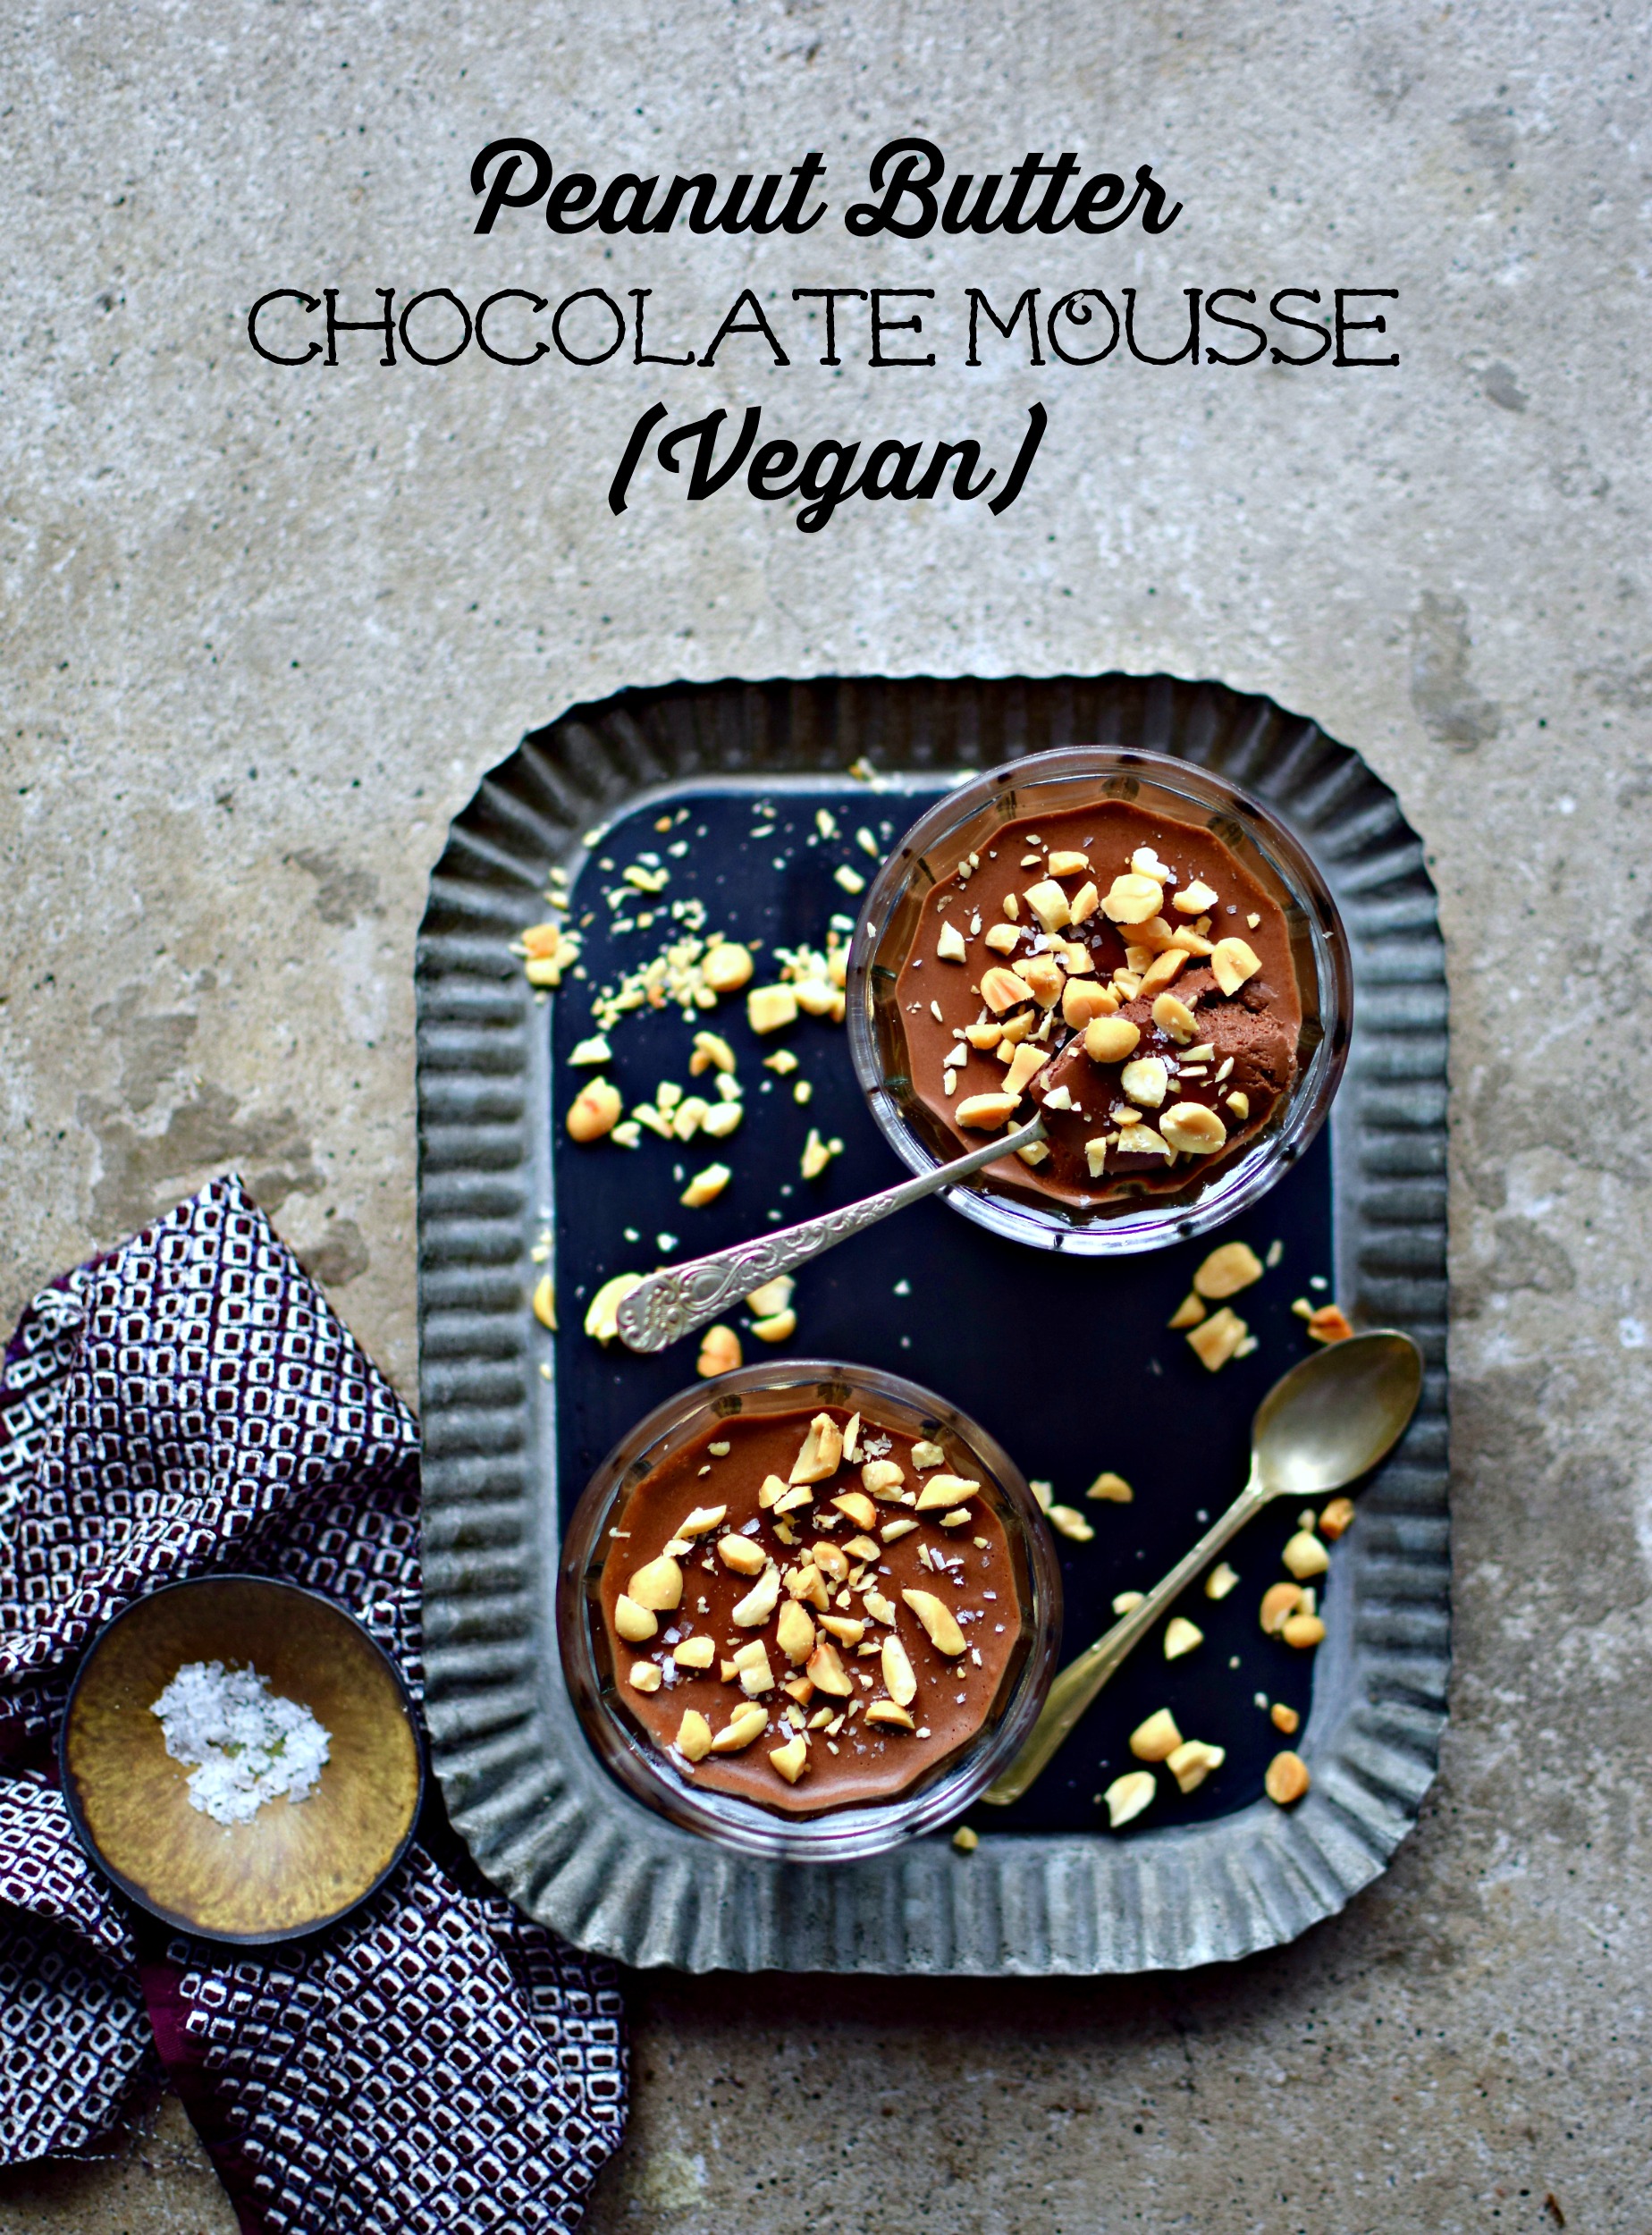 A slightly sweet, vegan chocolate mousse made with aquafaba and protein-packed peanut butter powder. Easy, light and perfect for a family or special occasion dessert. Top with crushed salted peanuts or pretzels for a flavour and texture contrast.